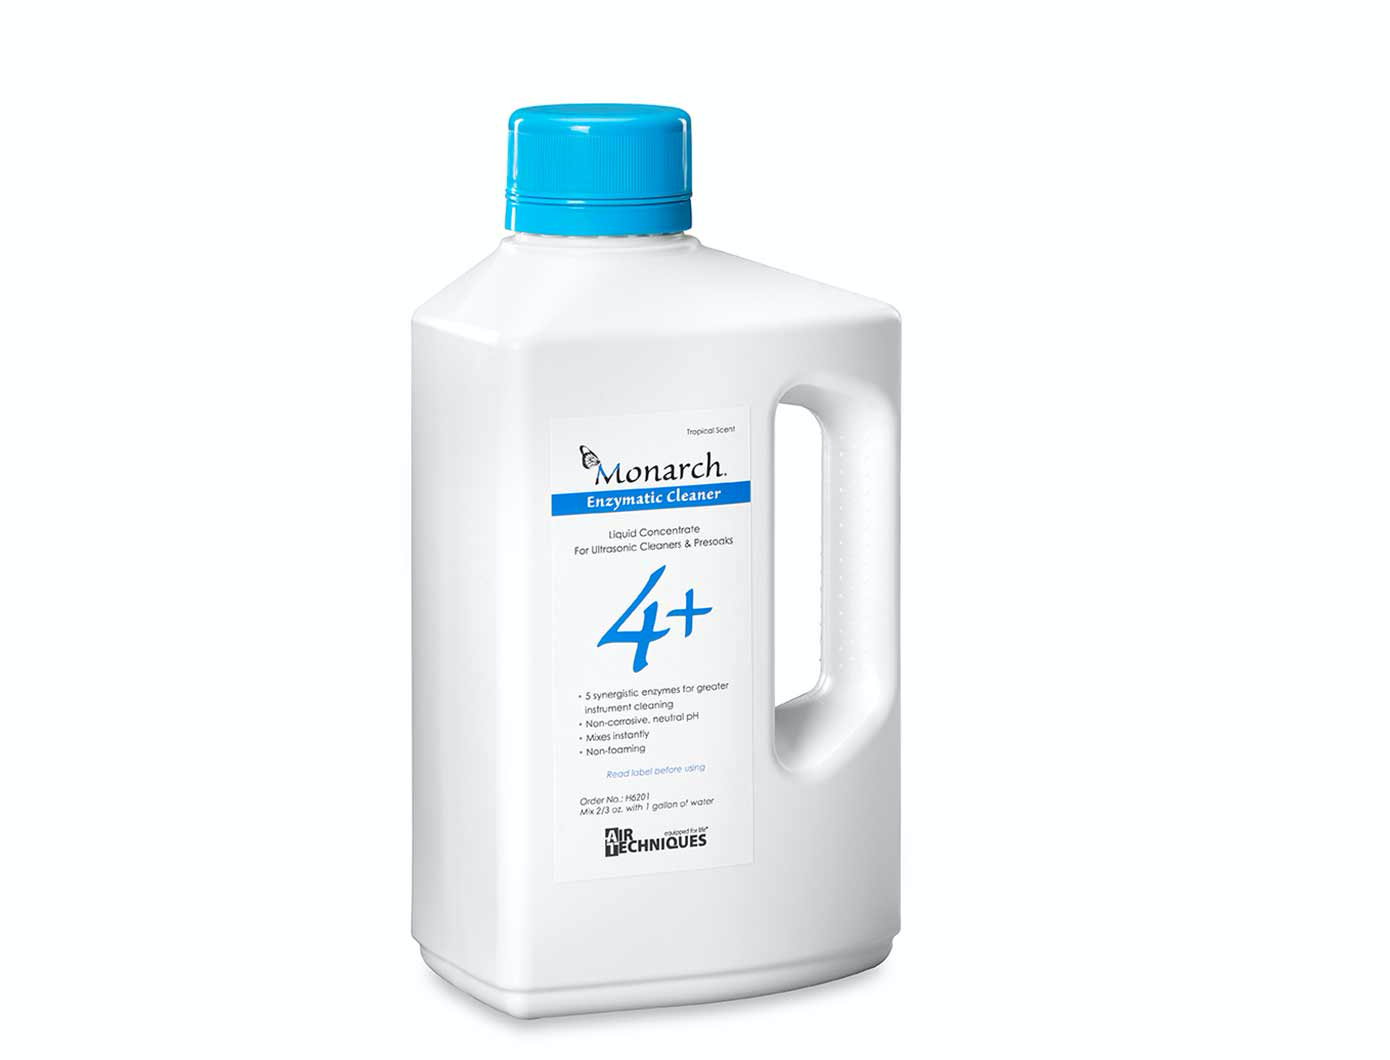 Enzymatic Cleaner